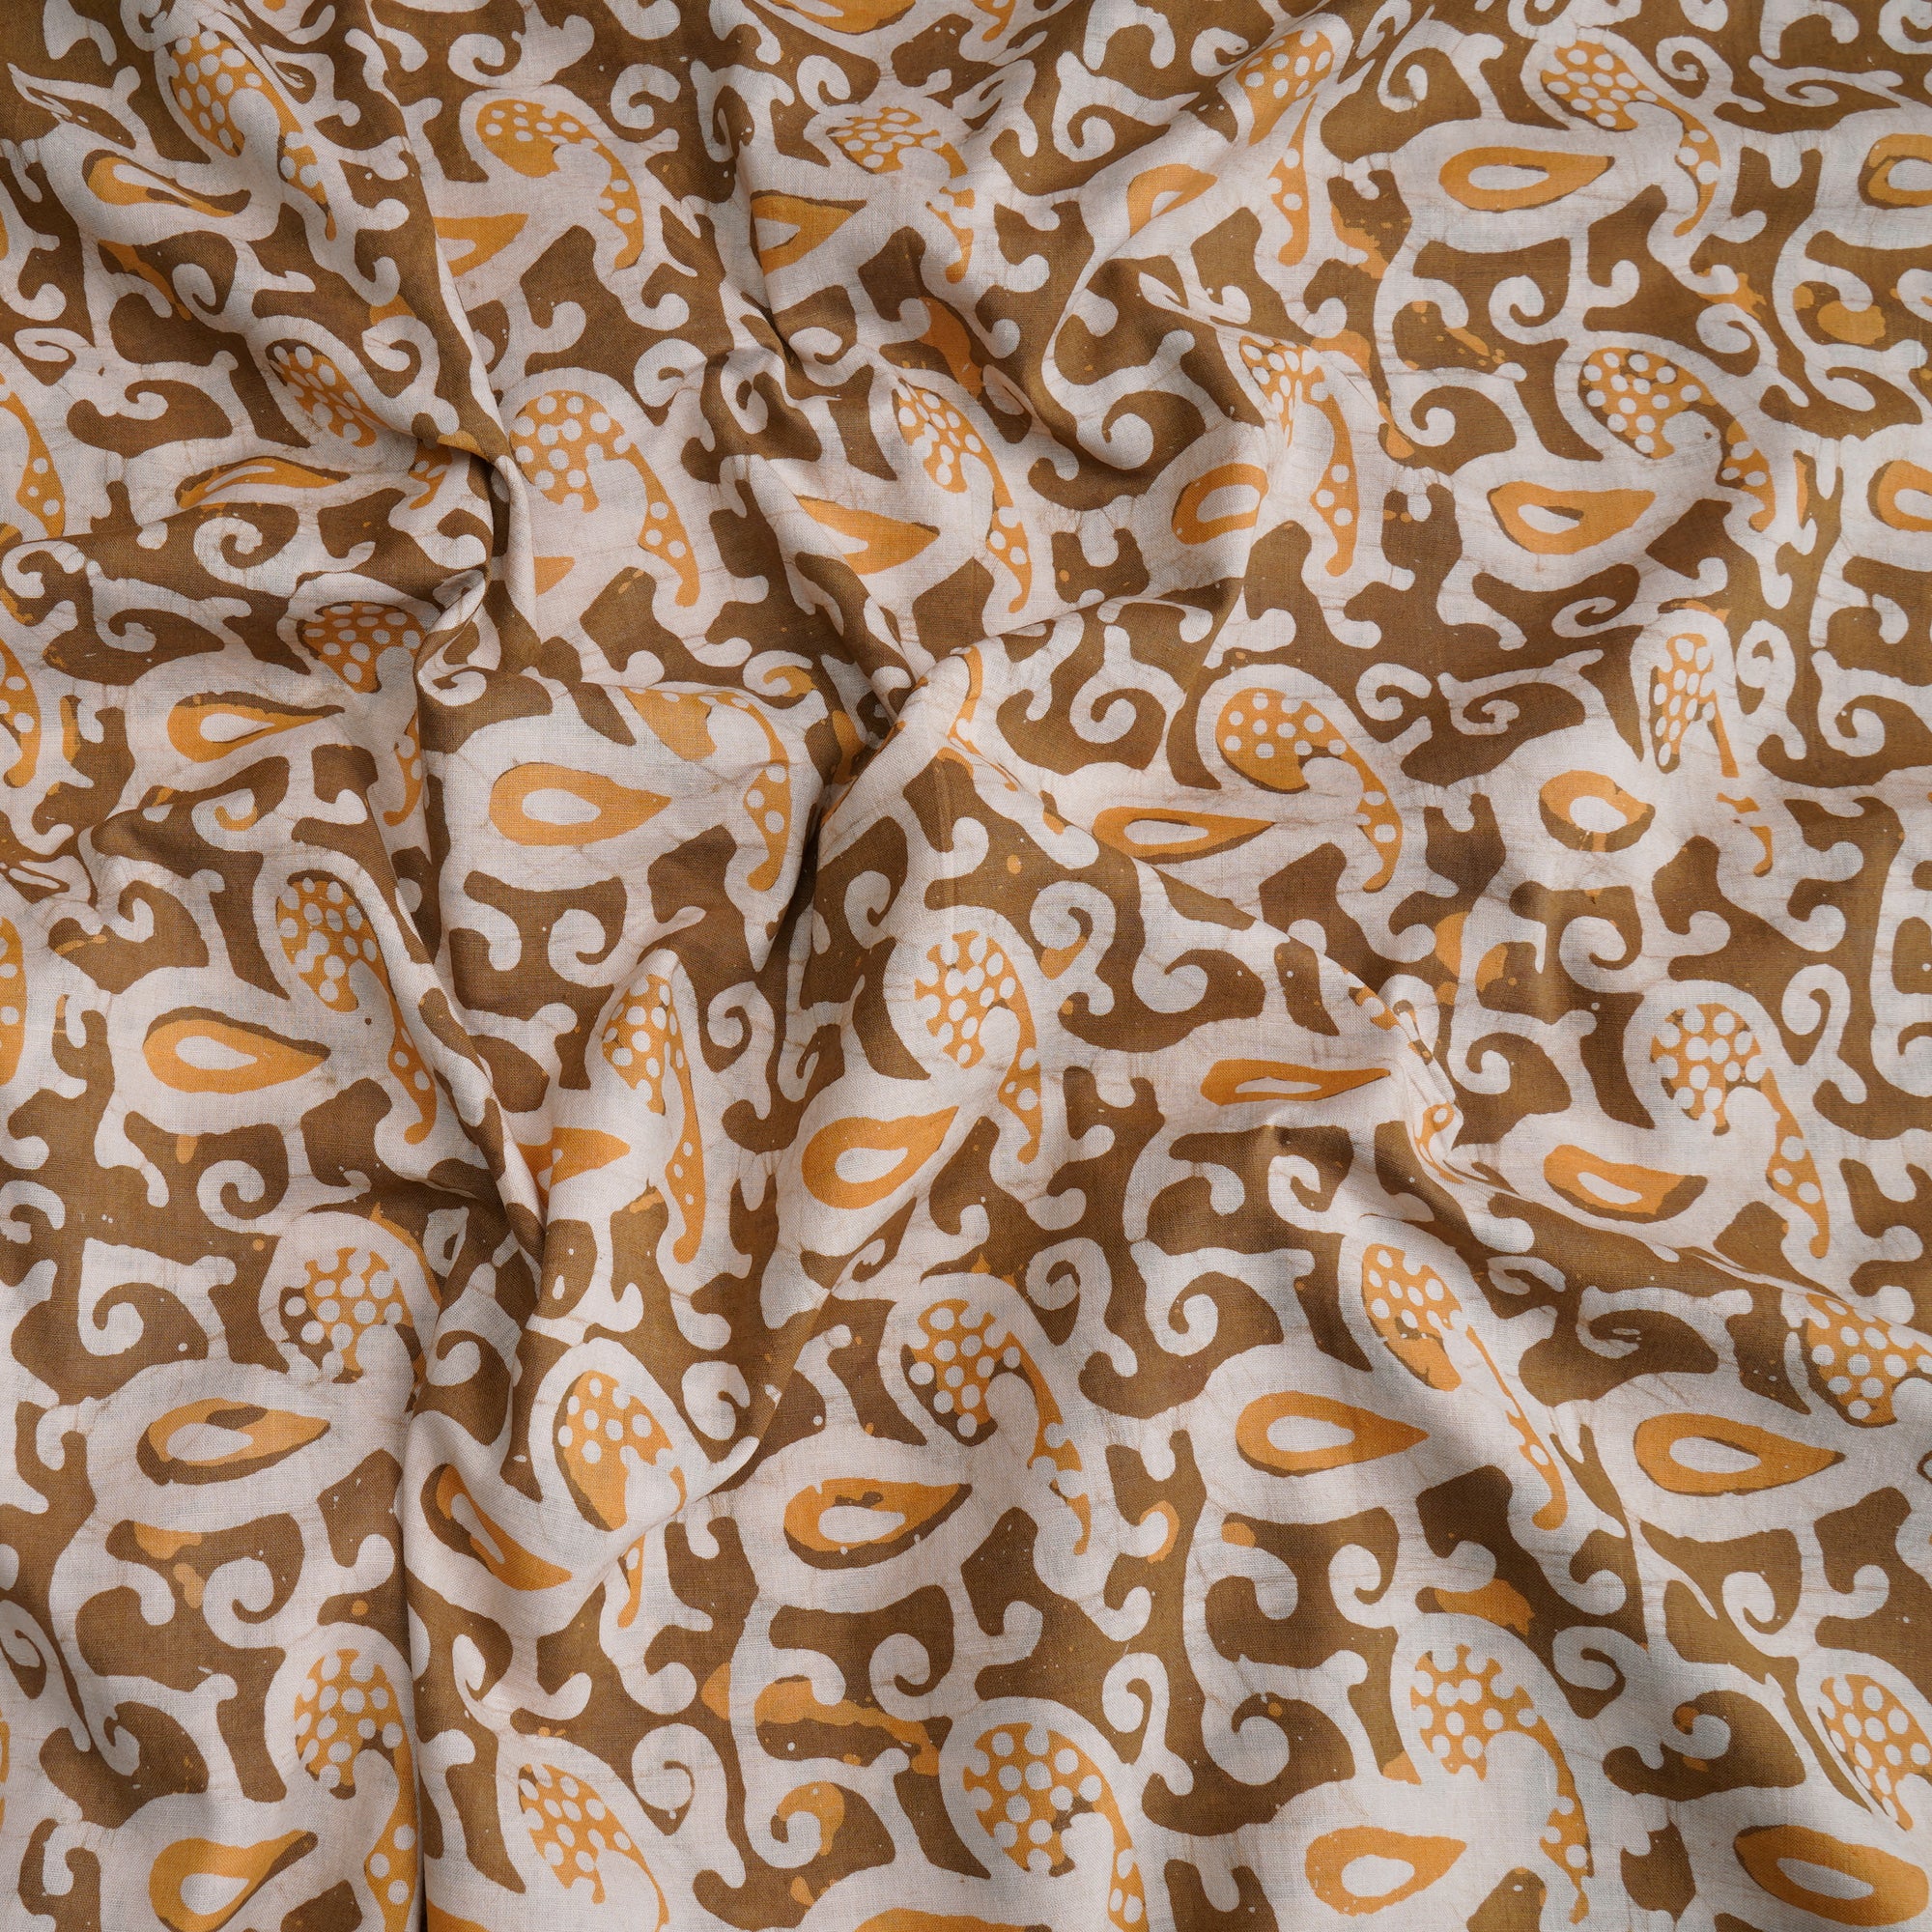 Tobacco Brown Handcrafted Waxed Batik Printed Cotton Fabric